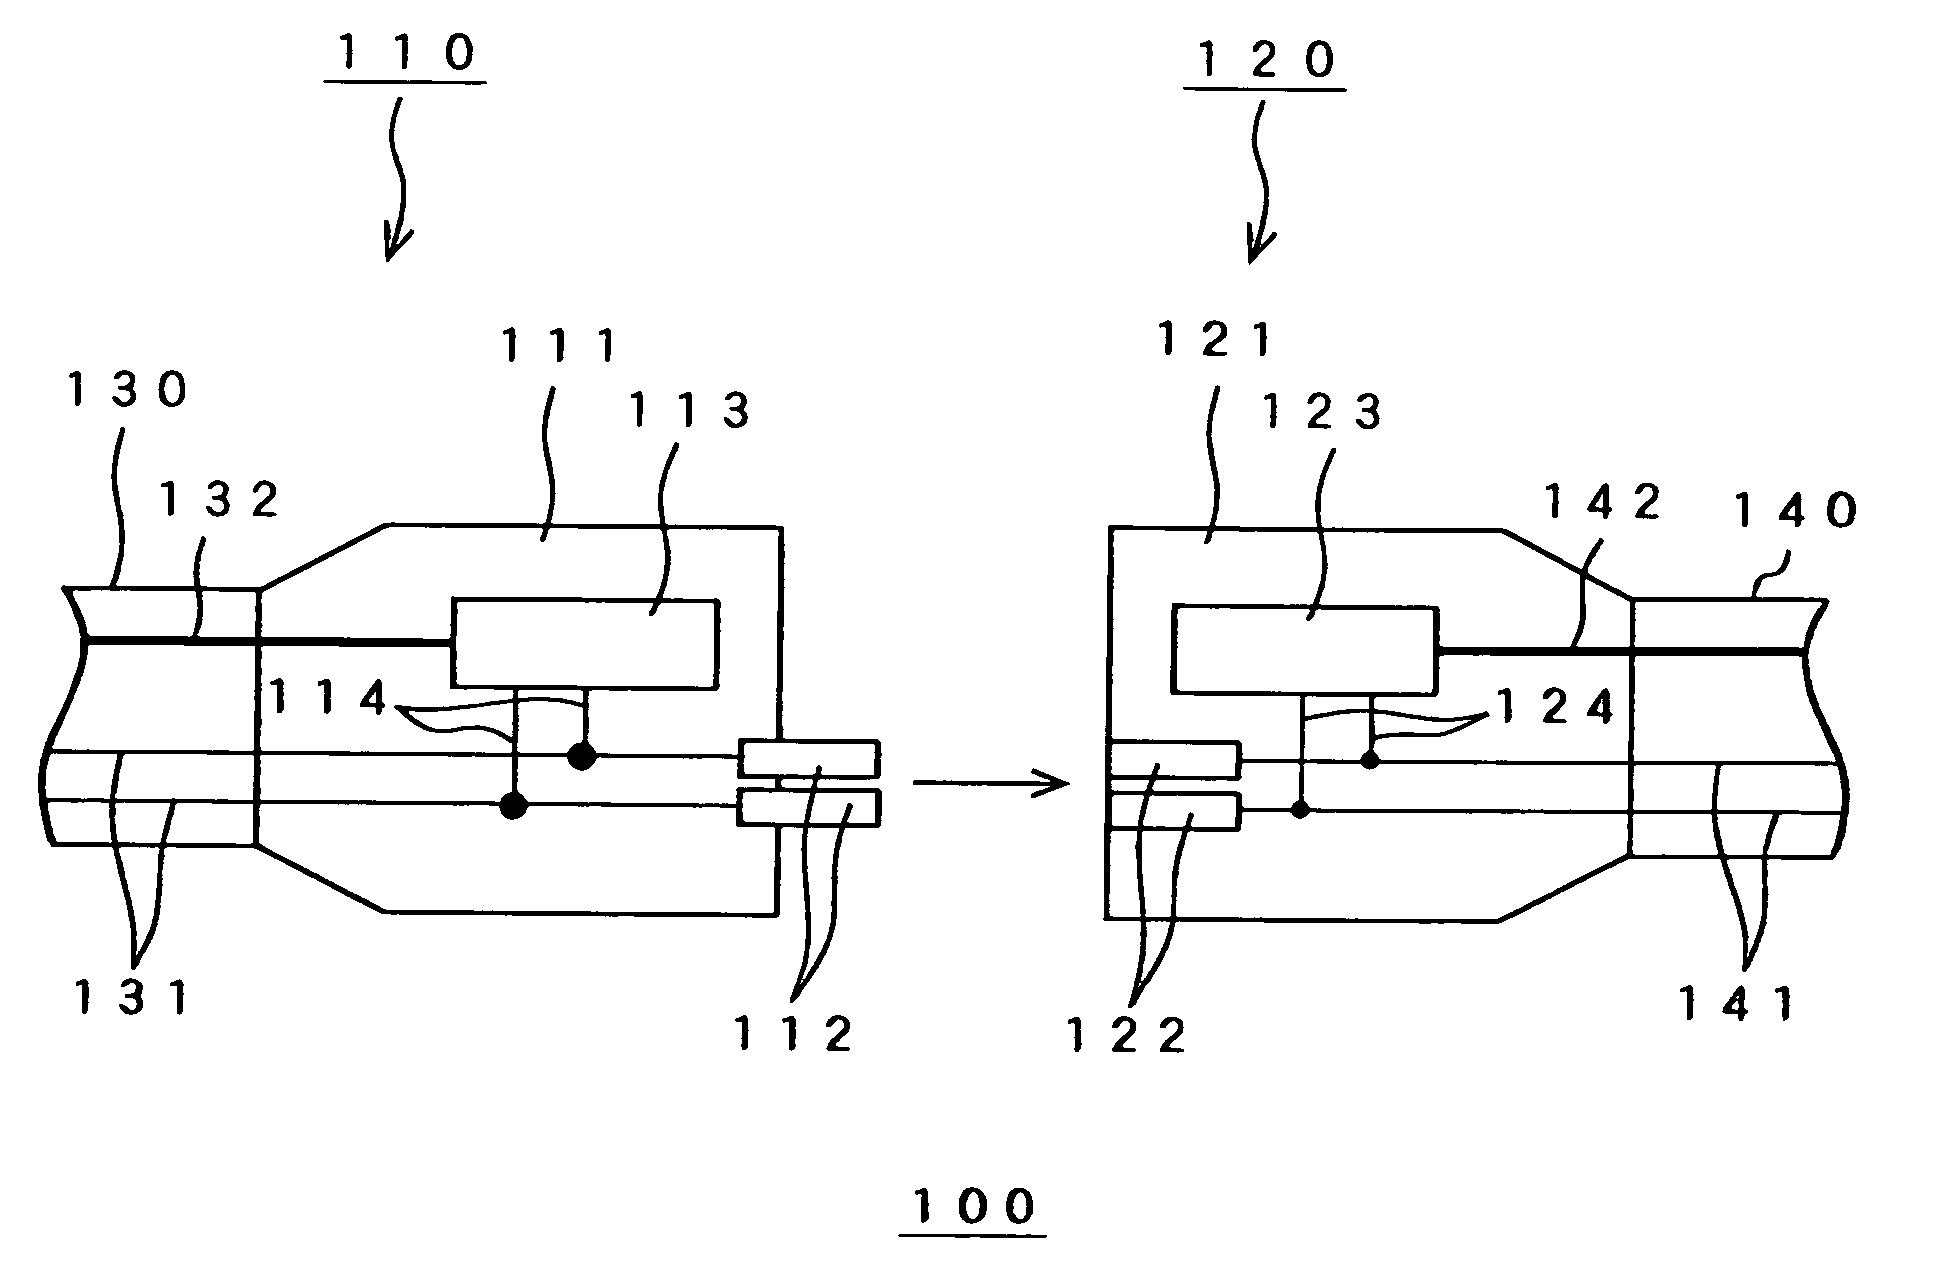 Electro-optical composite connector, electro-optical composite cable, and network devices using the same